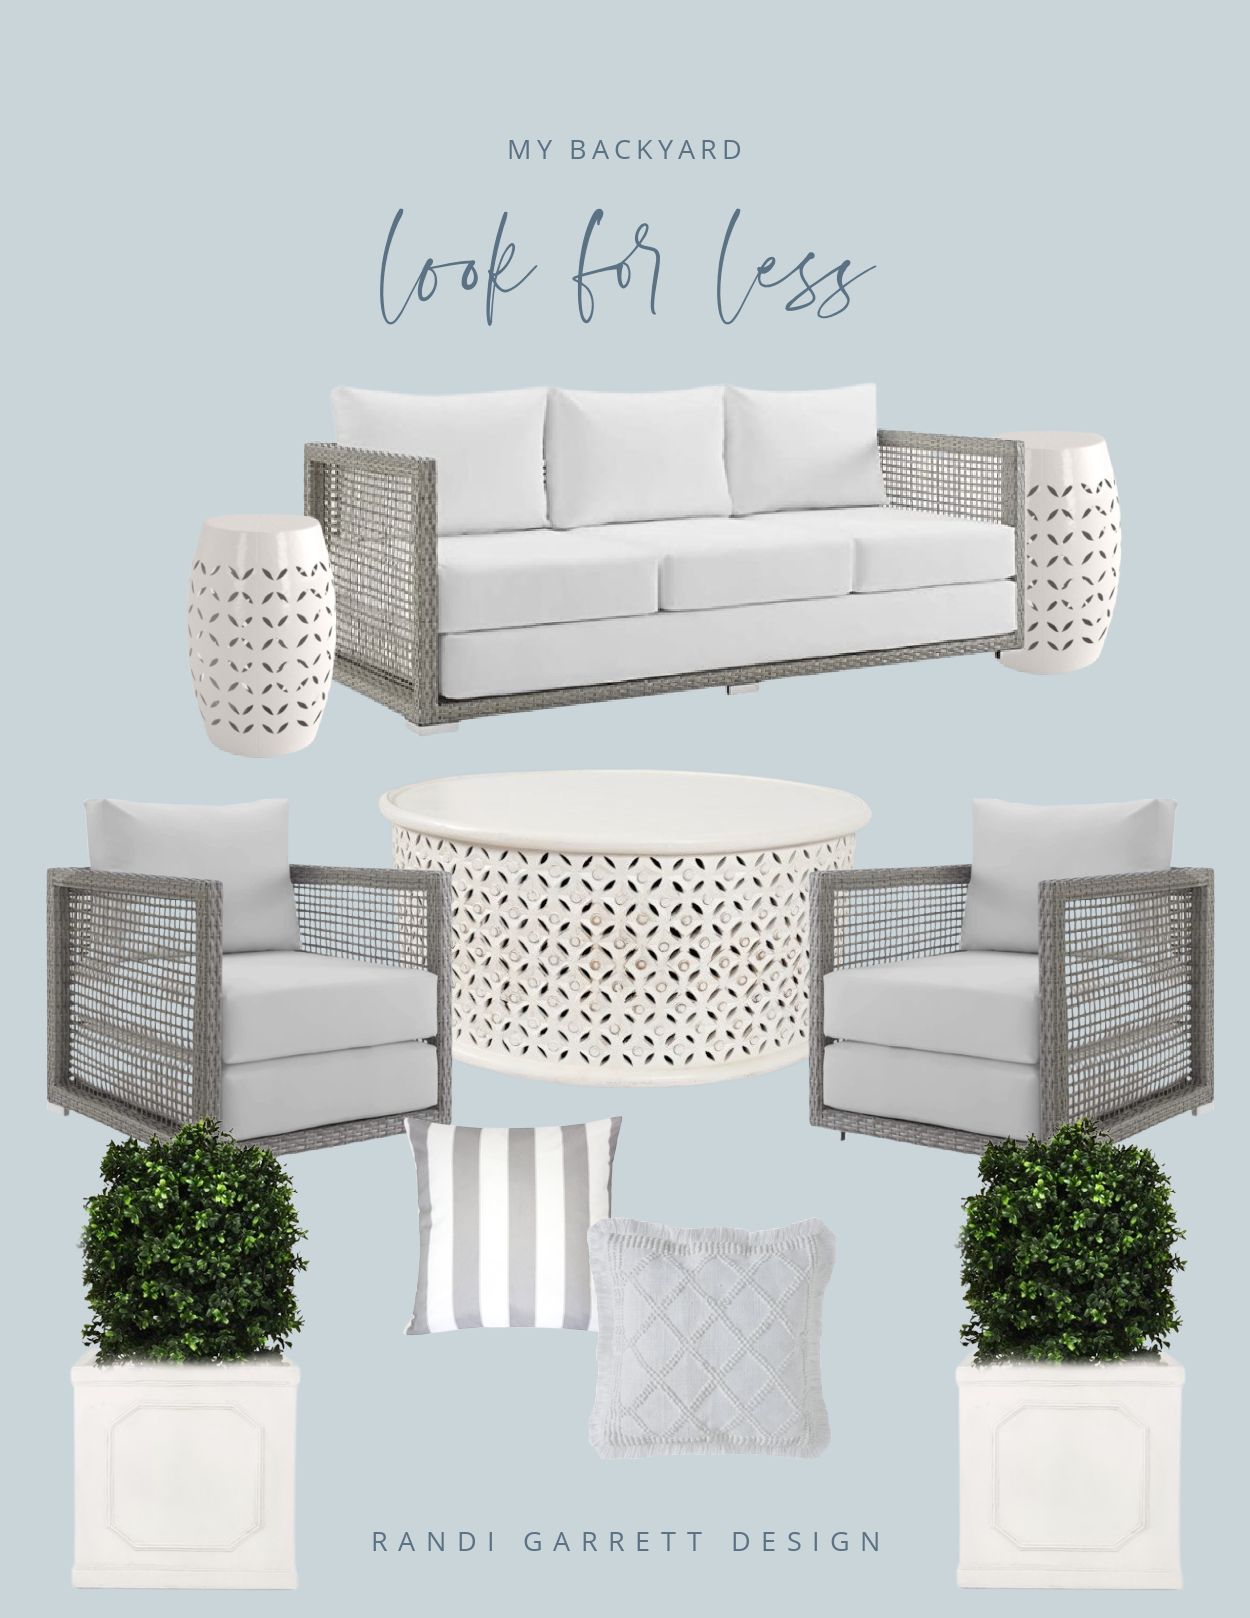 My Look for Less - The Wren's Backyard